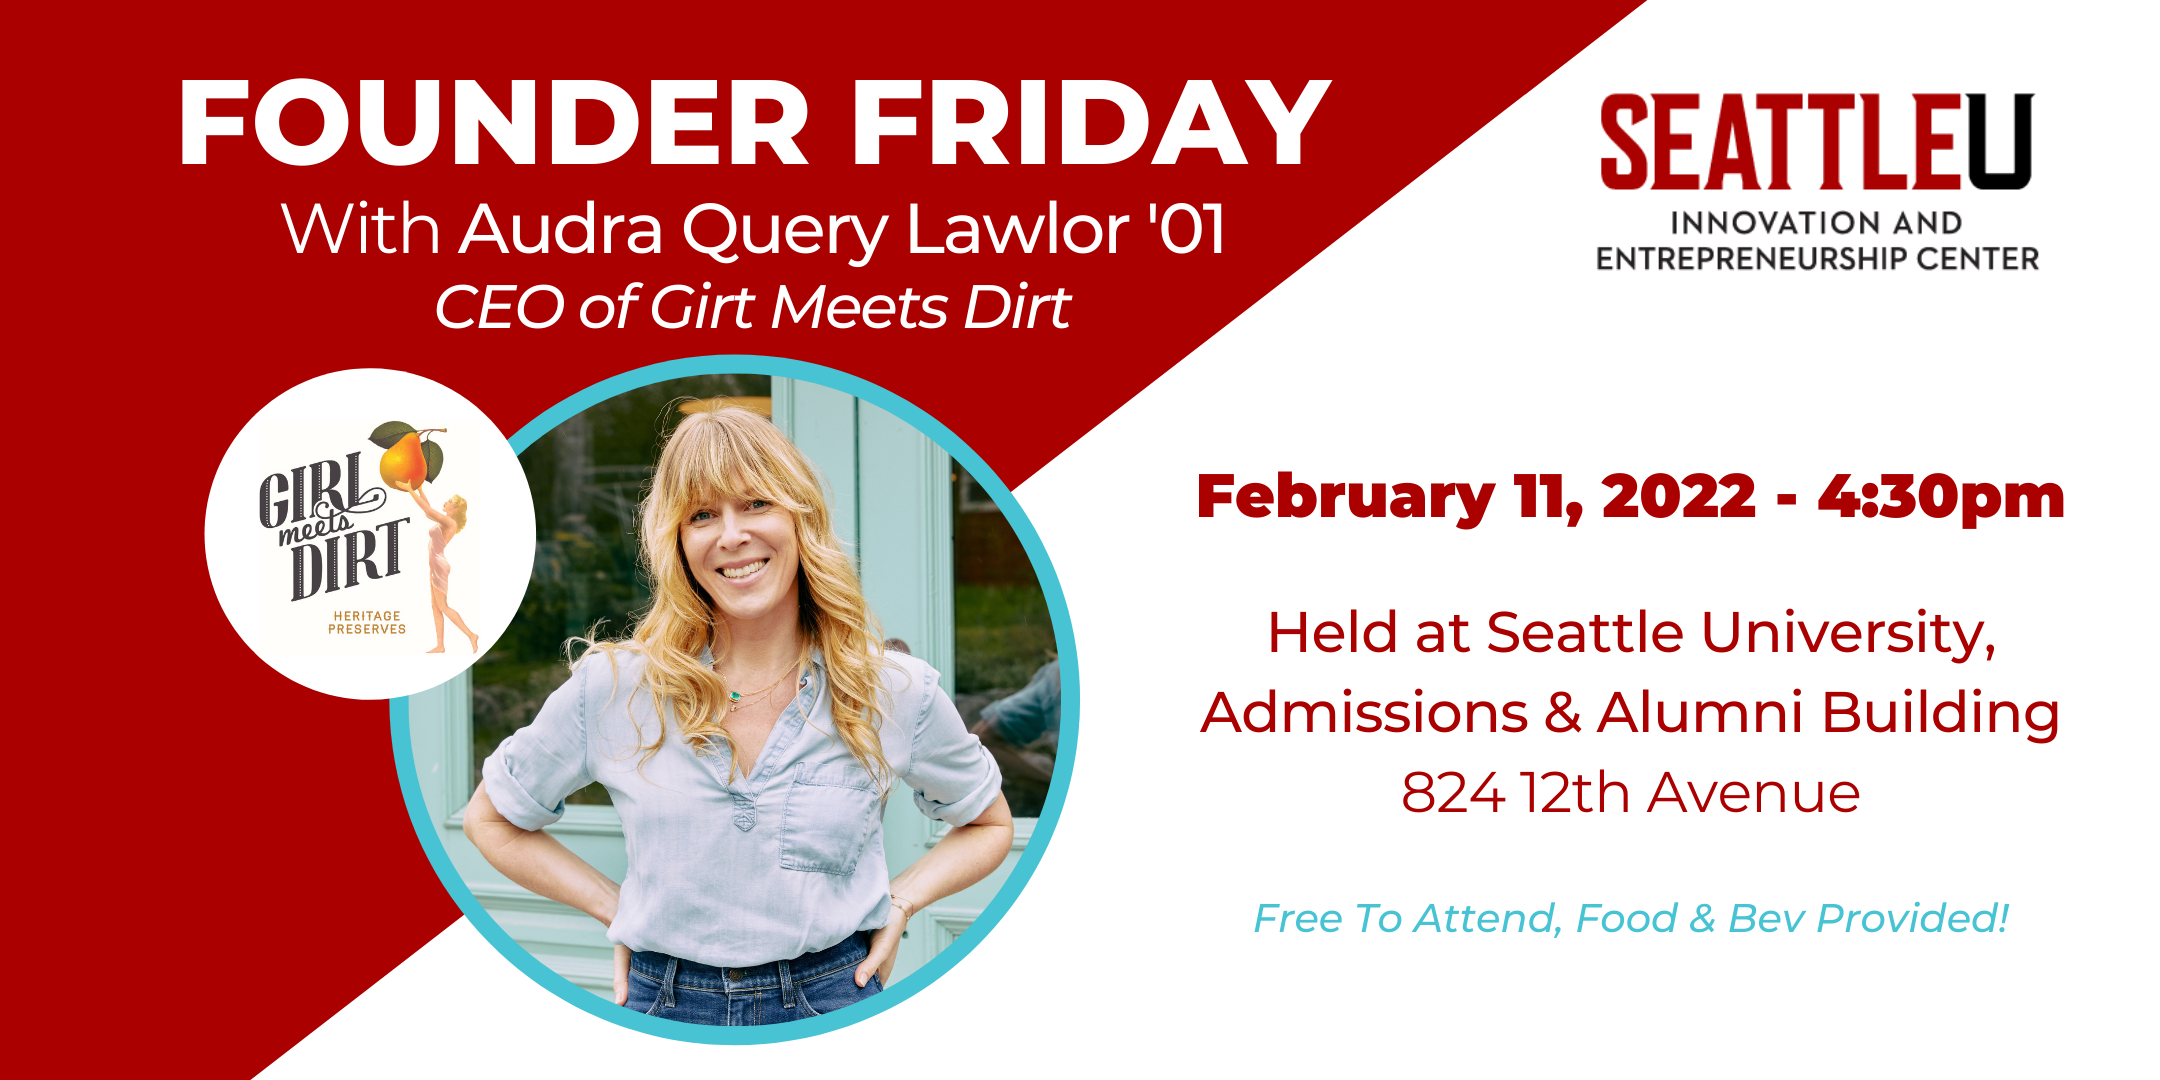 Founder Friday with Audra Query Lawlor, CEO of Girl Meets Dirt